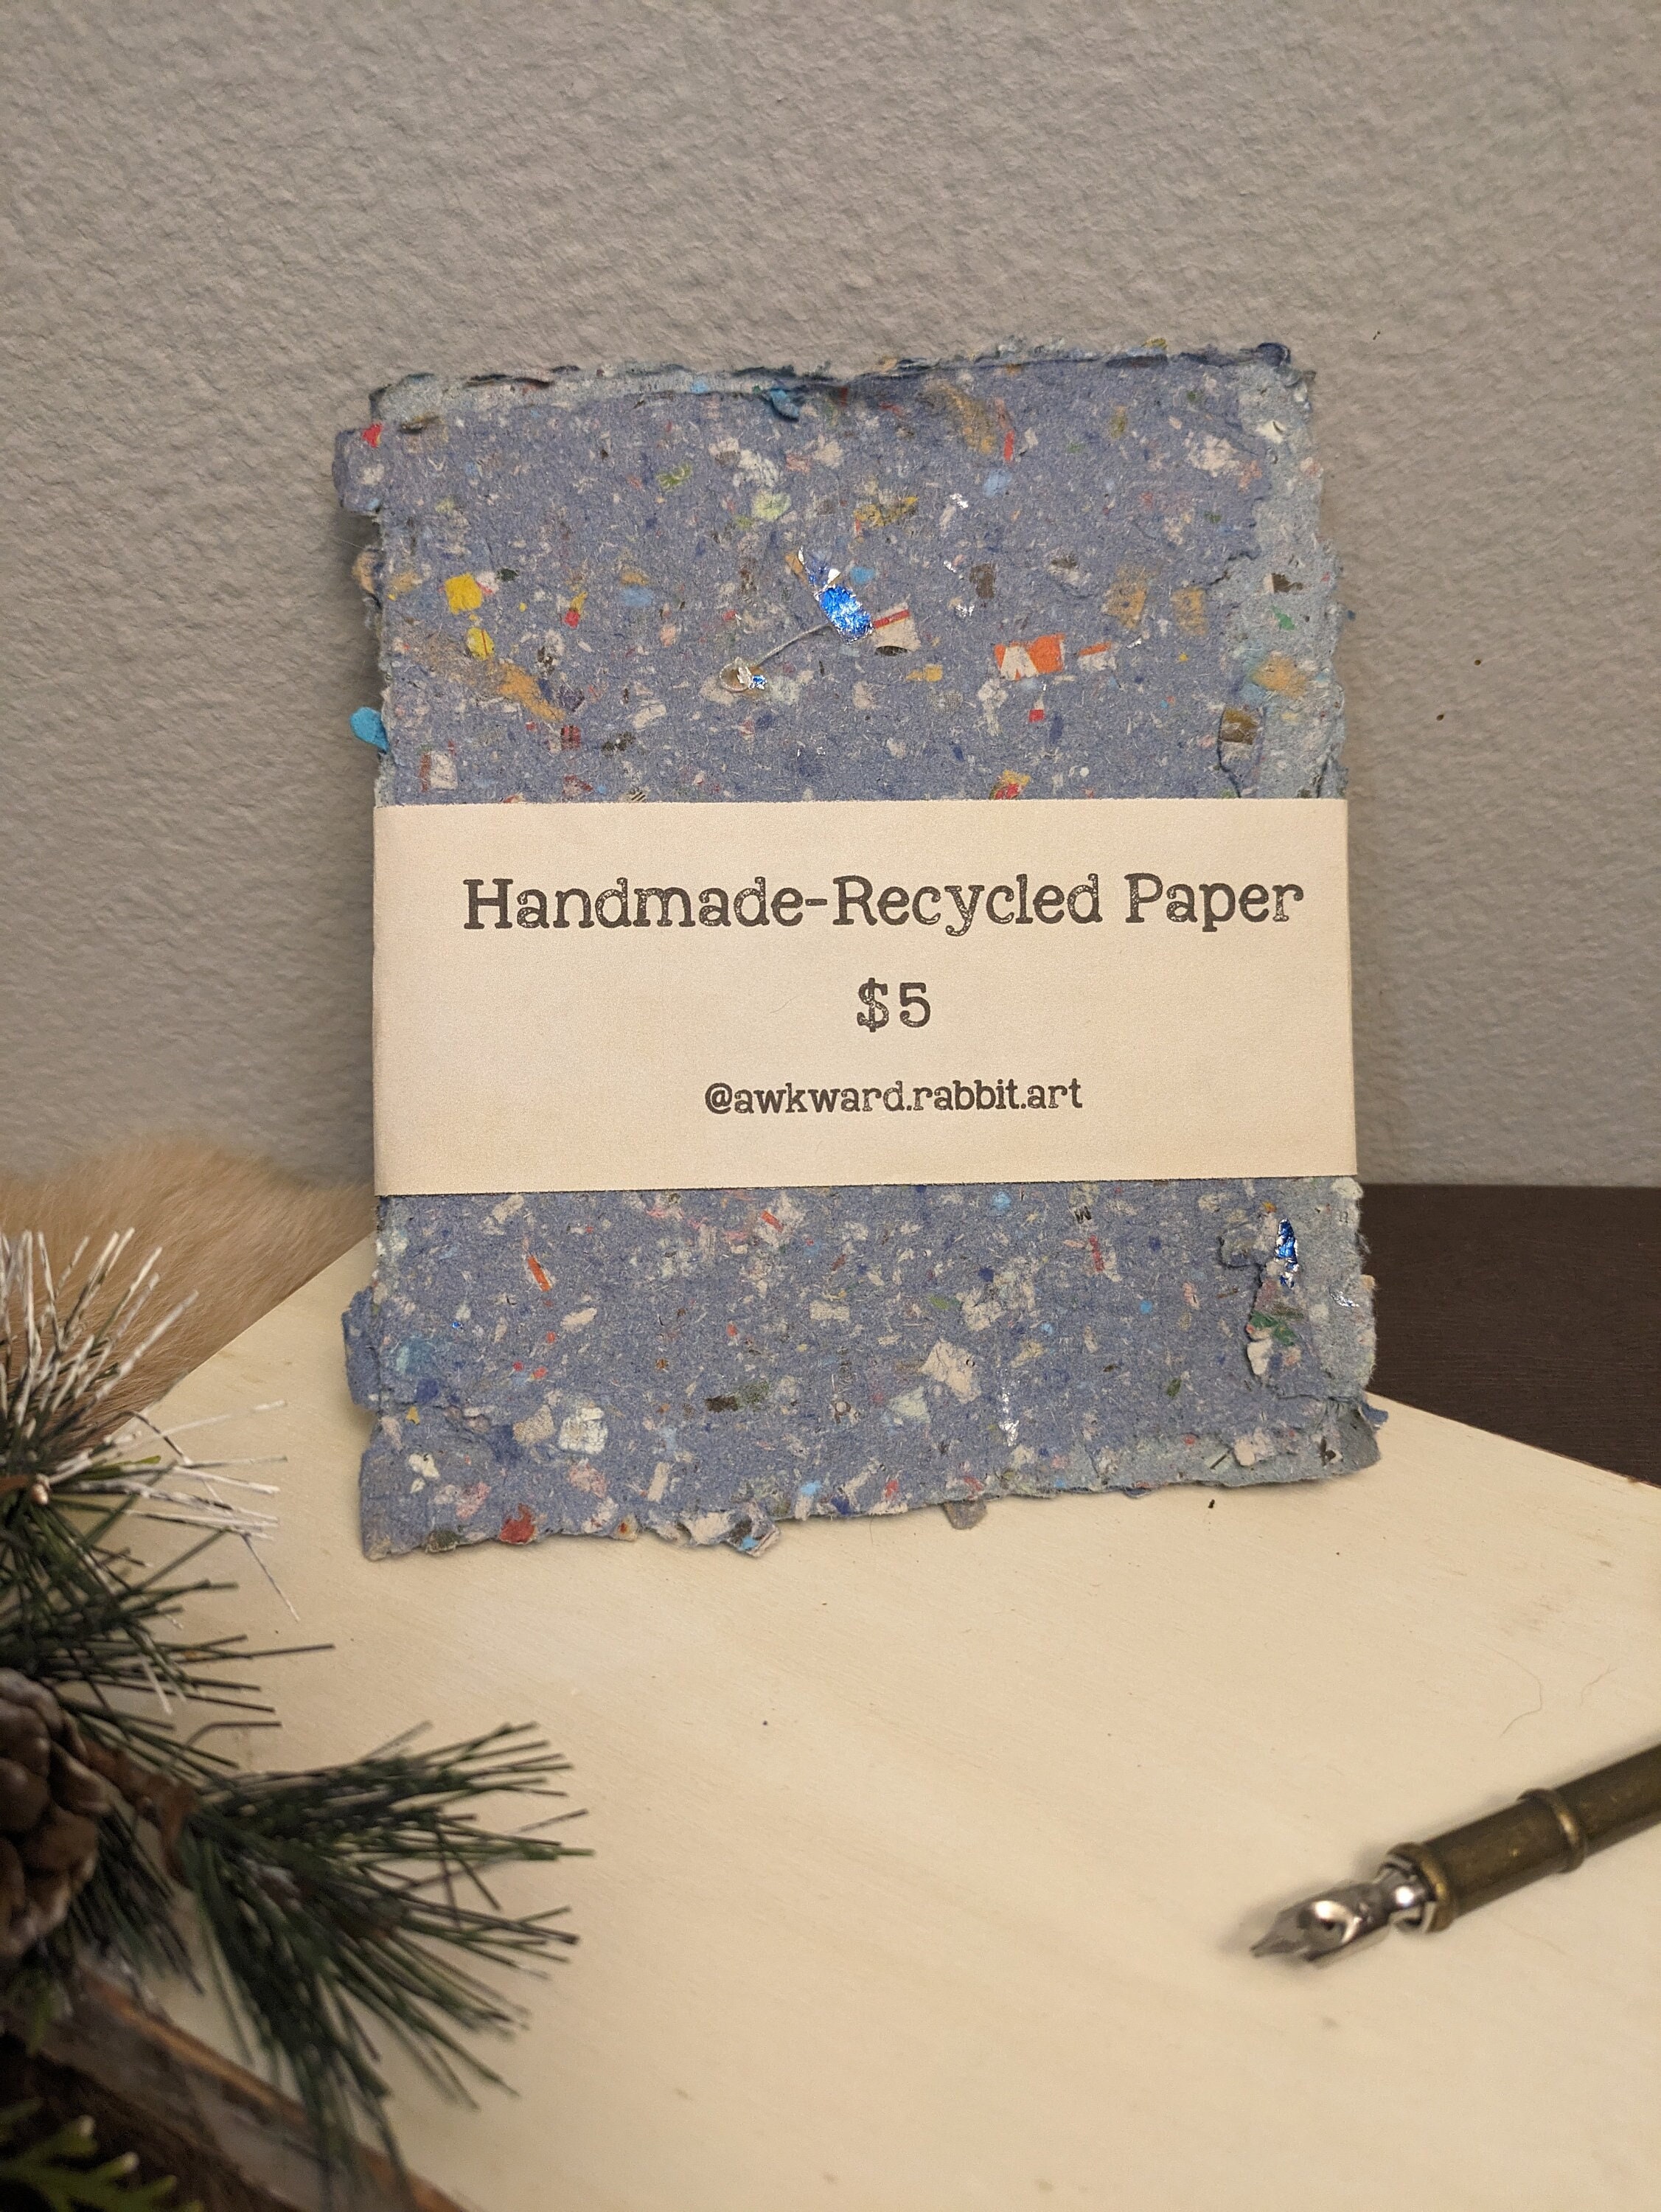 Recycled Paper Printing 